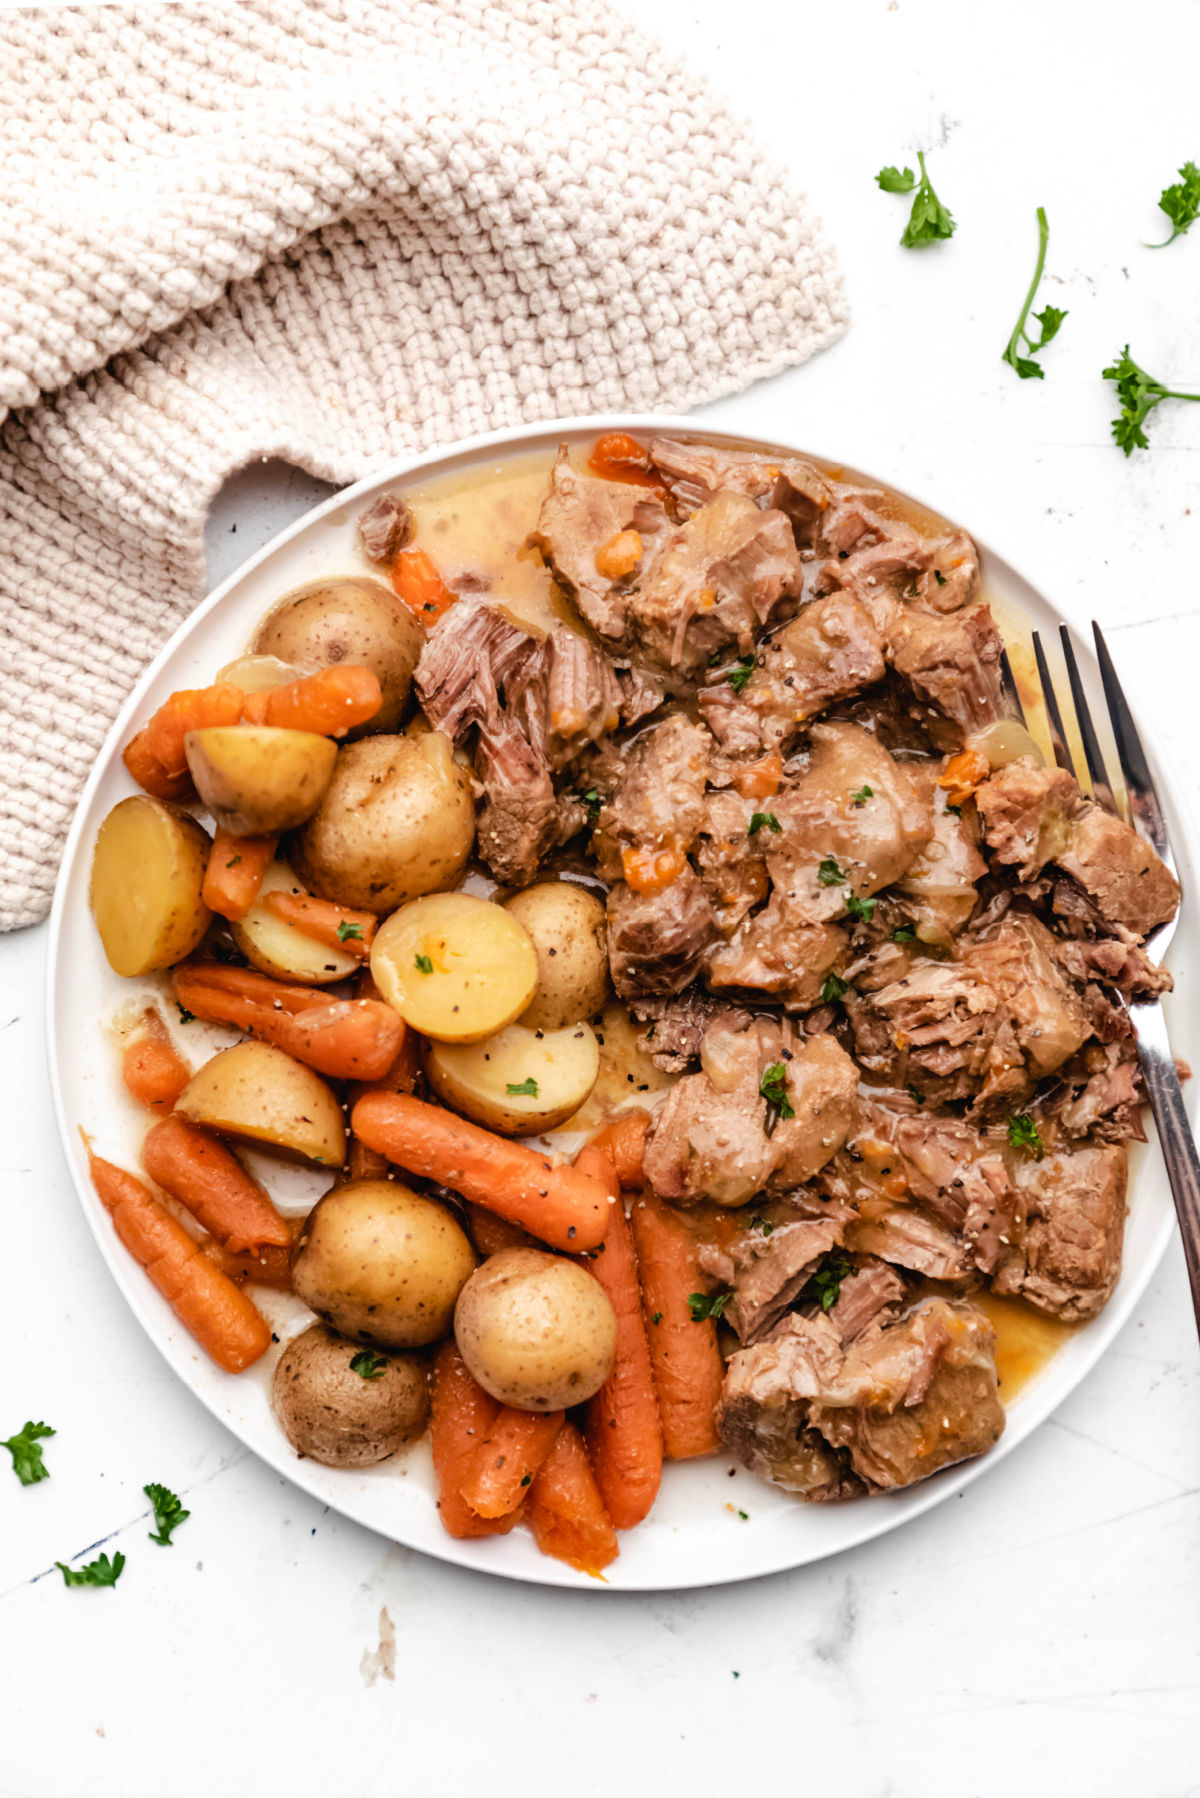 A plate of ranch beef tips, potatoes, and carrots next to a knit napkin.